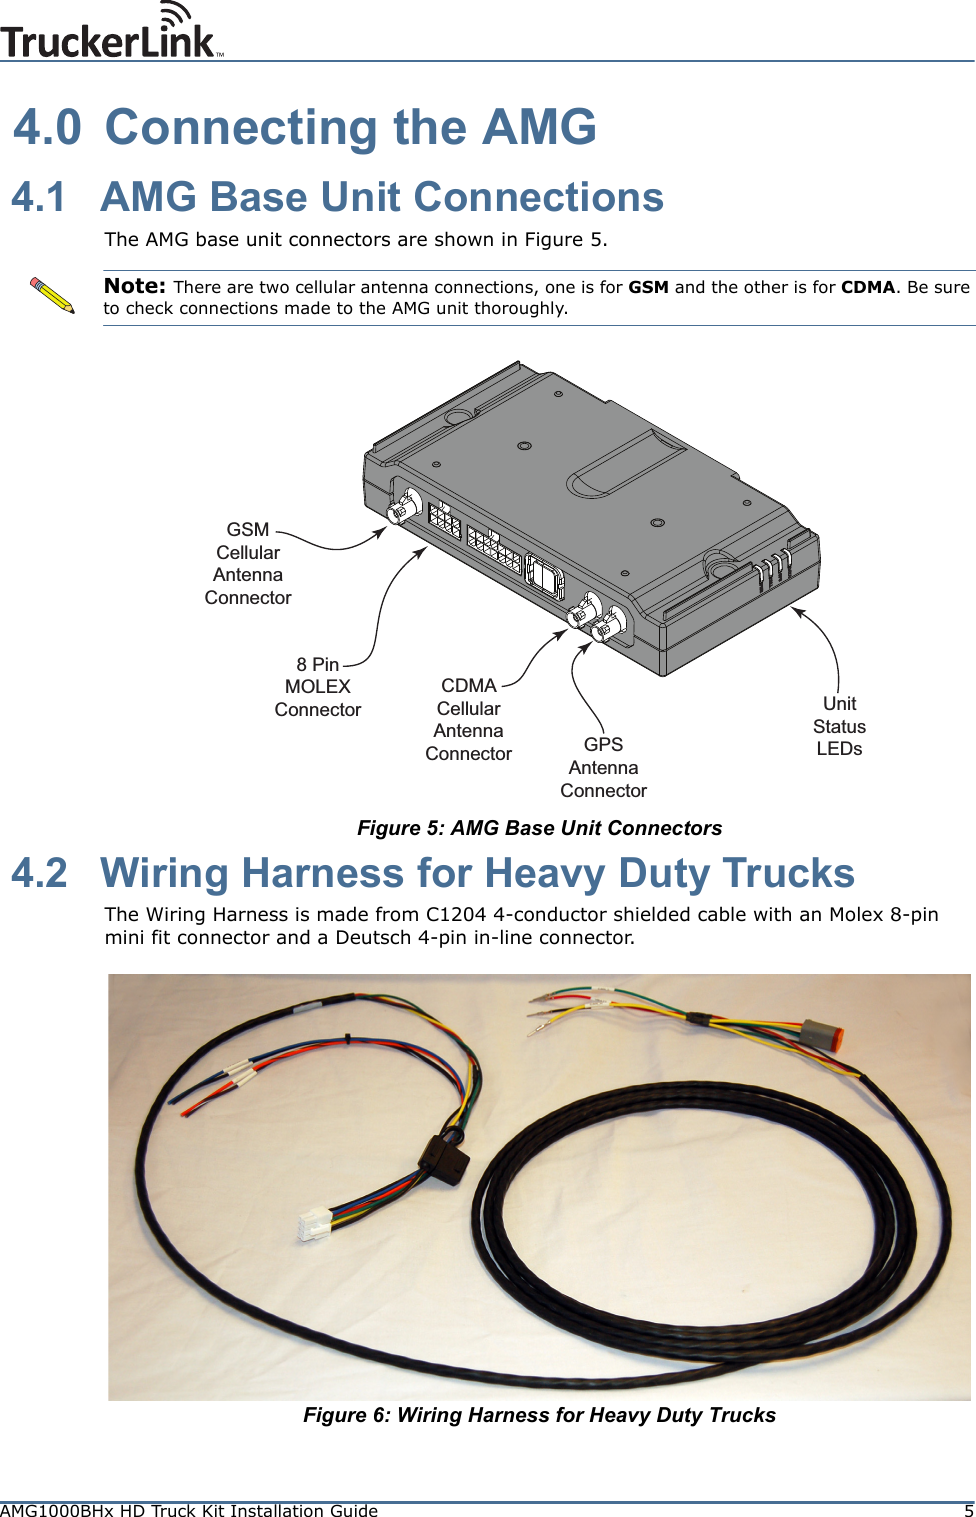 AMG1000BHx HD Truck Kit Installation Guide 5 4.0 Connecting the AMG 4.1 AMG Base Unit ConnectionsThe AMG base unit connectors are shown in Figure 5. Figure 5: AMG Base Unit Connectors 4.2 Wiring Harness for Heavy Duty TrucksThe Wiring Harness is made from C1204 4-conductor shielded cable with an Molex 8-pin mini fit connector and a Deutsch 4-pin in-line connector.Figure 6: Wiring Harness for Heavy Duty TrucksNote: There are two cellular antenna connections, one is for GSM and the other is for CDMA. Be sure to check connections made to the AMG unit thoroughly.GSMCellular Antenna Connector8 Pin MOLEXConnectorCDMACellular Antenna Connector GPSAntenna ConnectorUnit Status LEDs